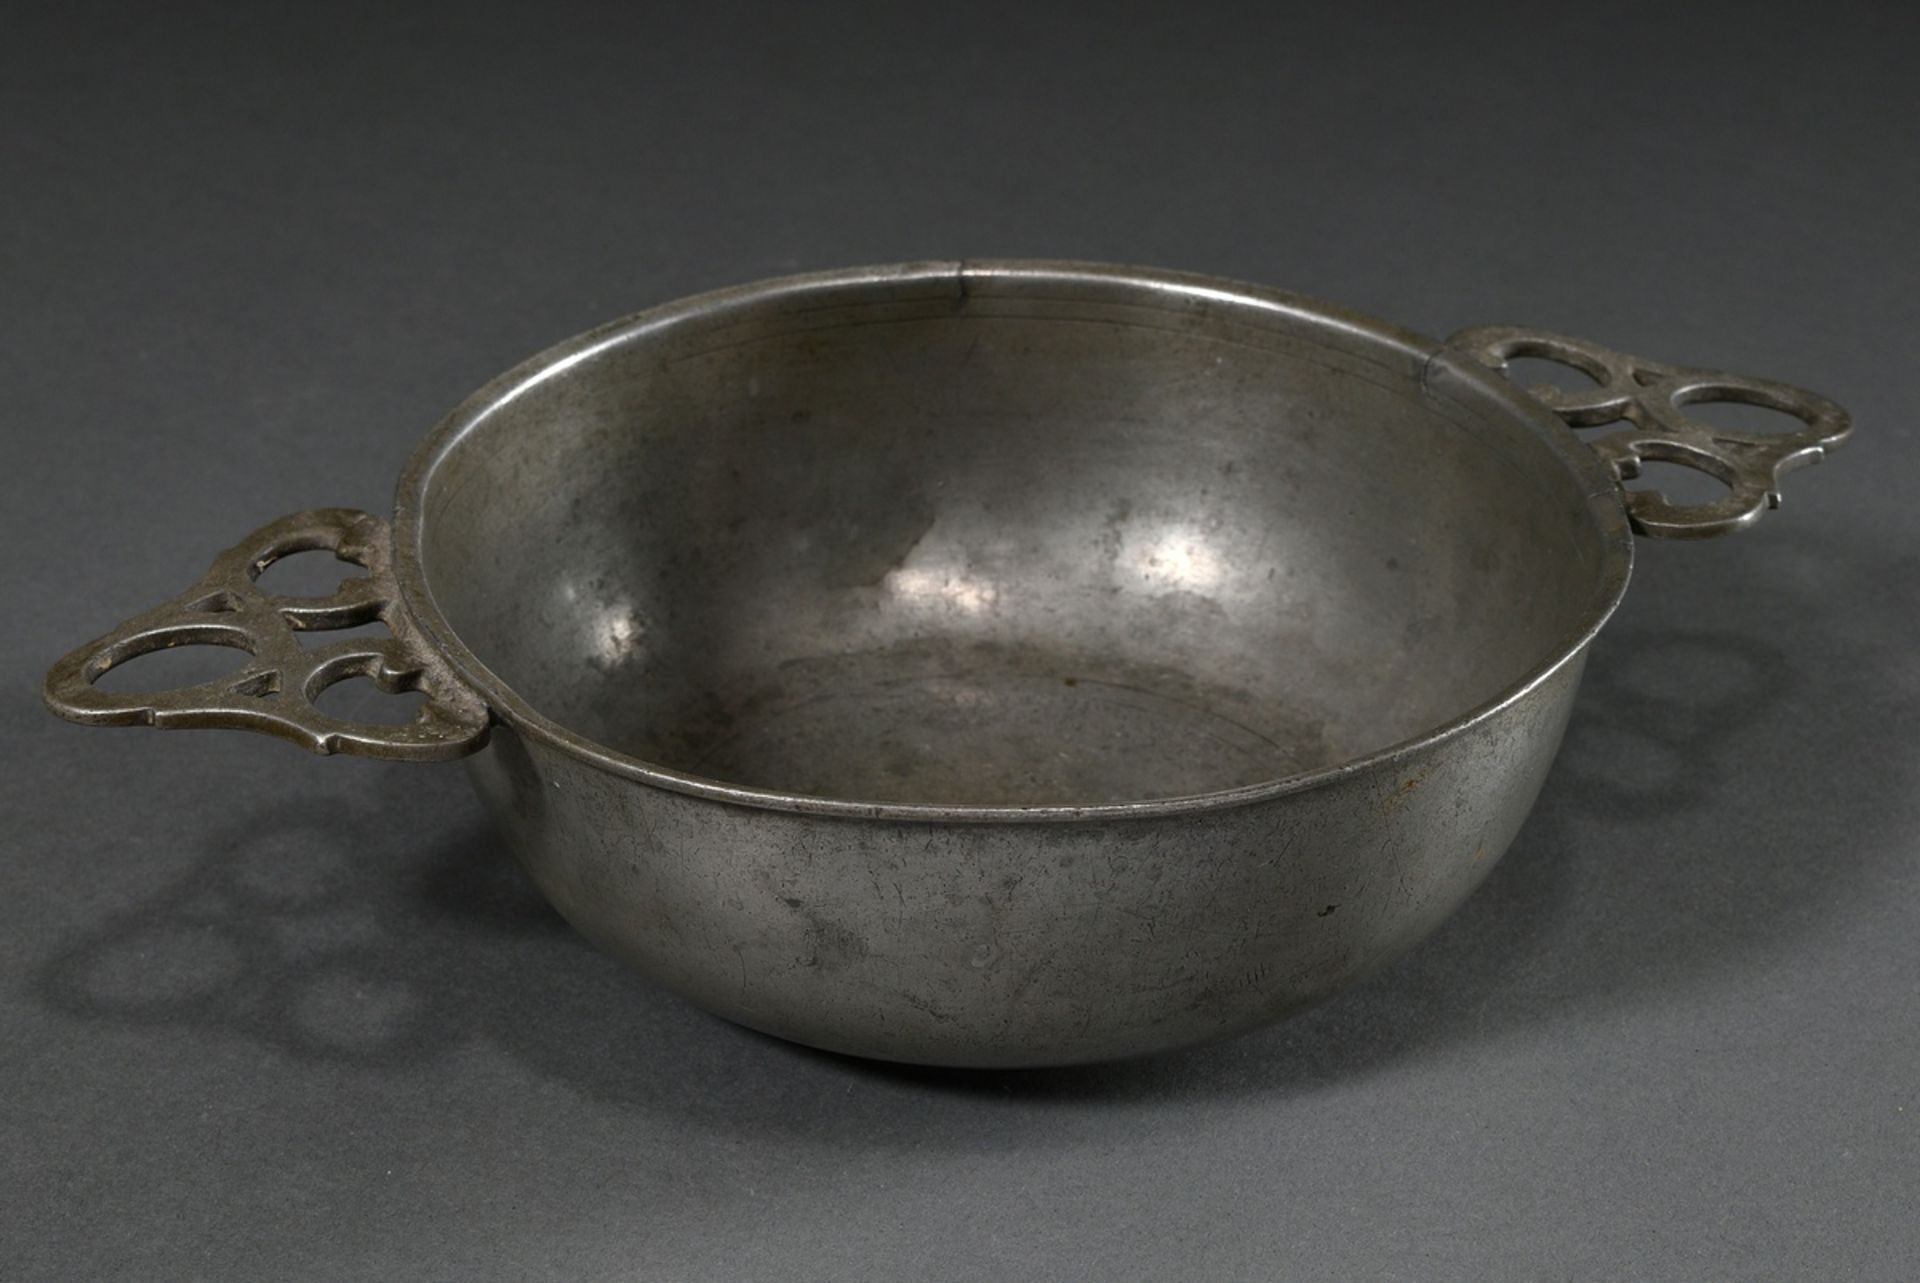 North German pewter ear bowl or maternity bowl with symmetrical openwork handles, on the bottom eng